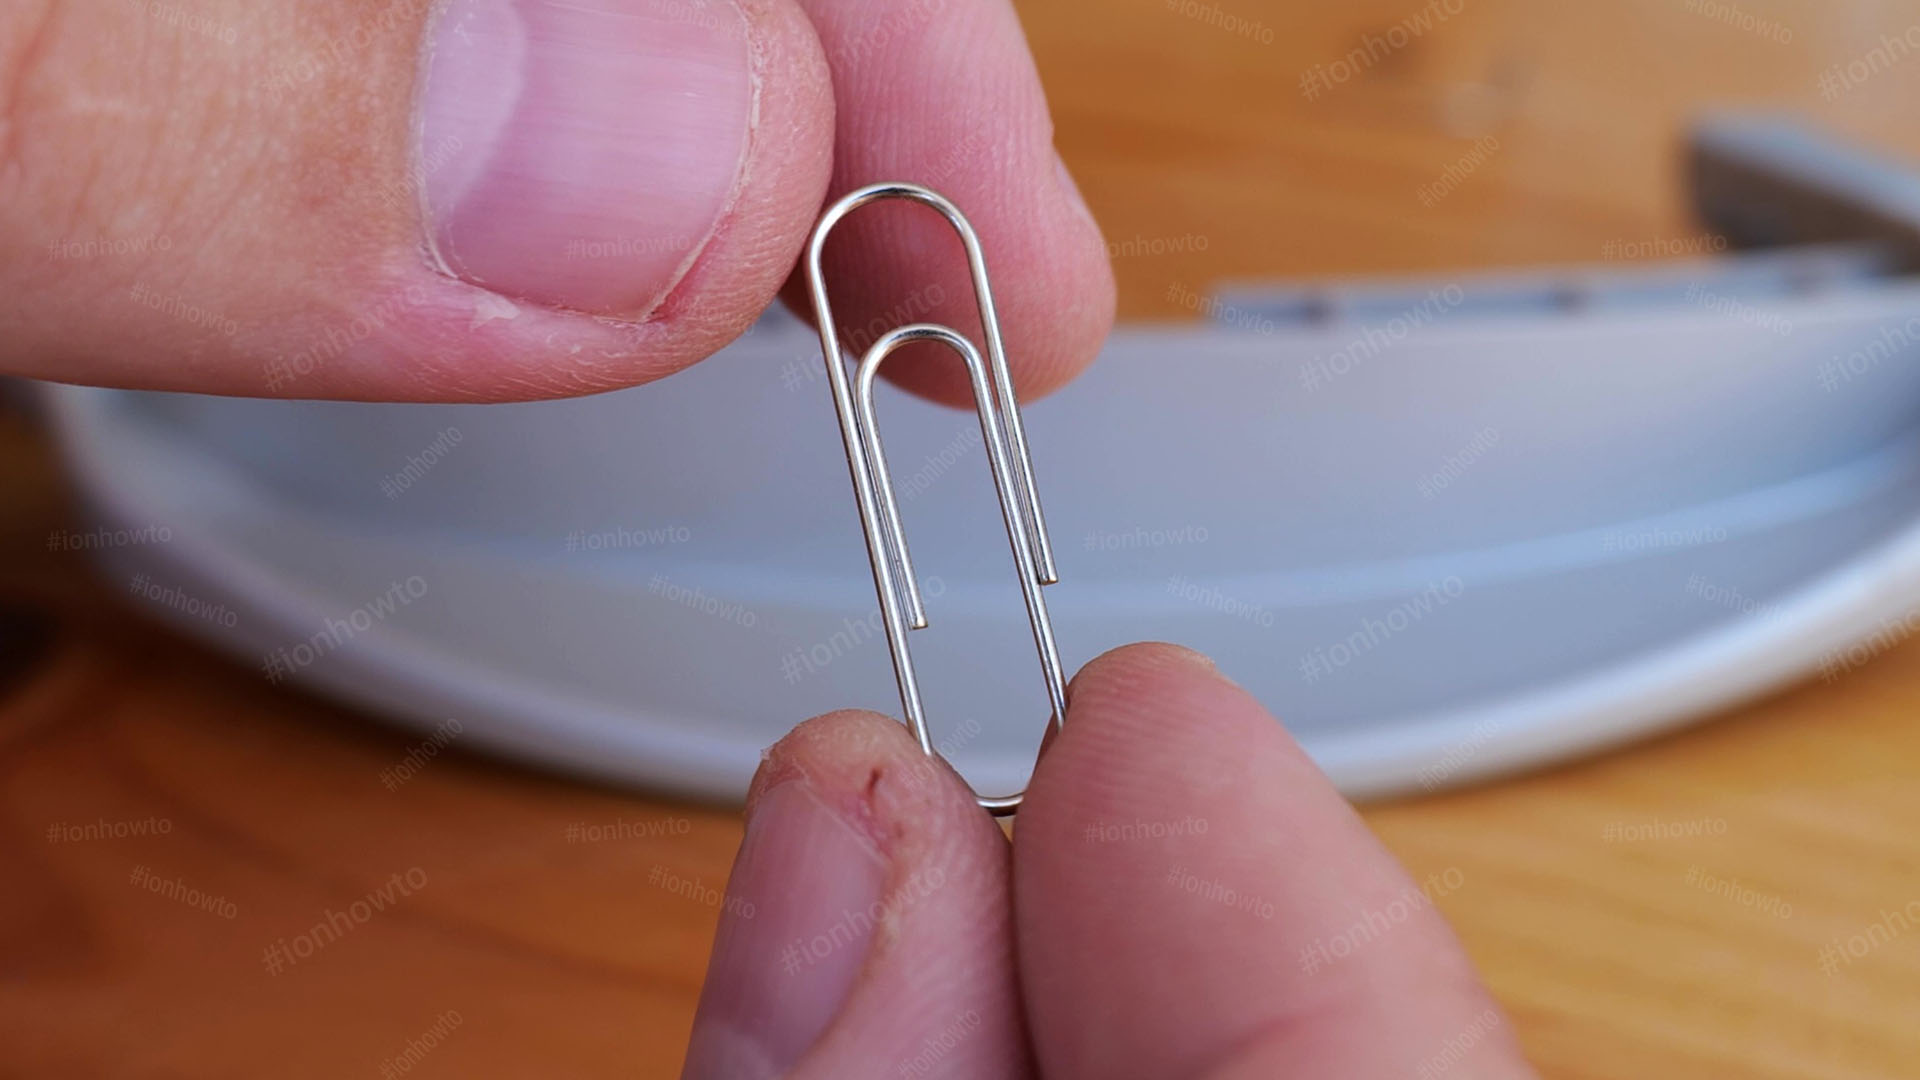 Plastic Welding With a Paperclip